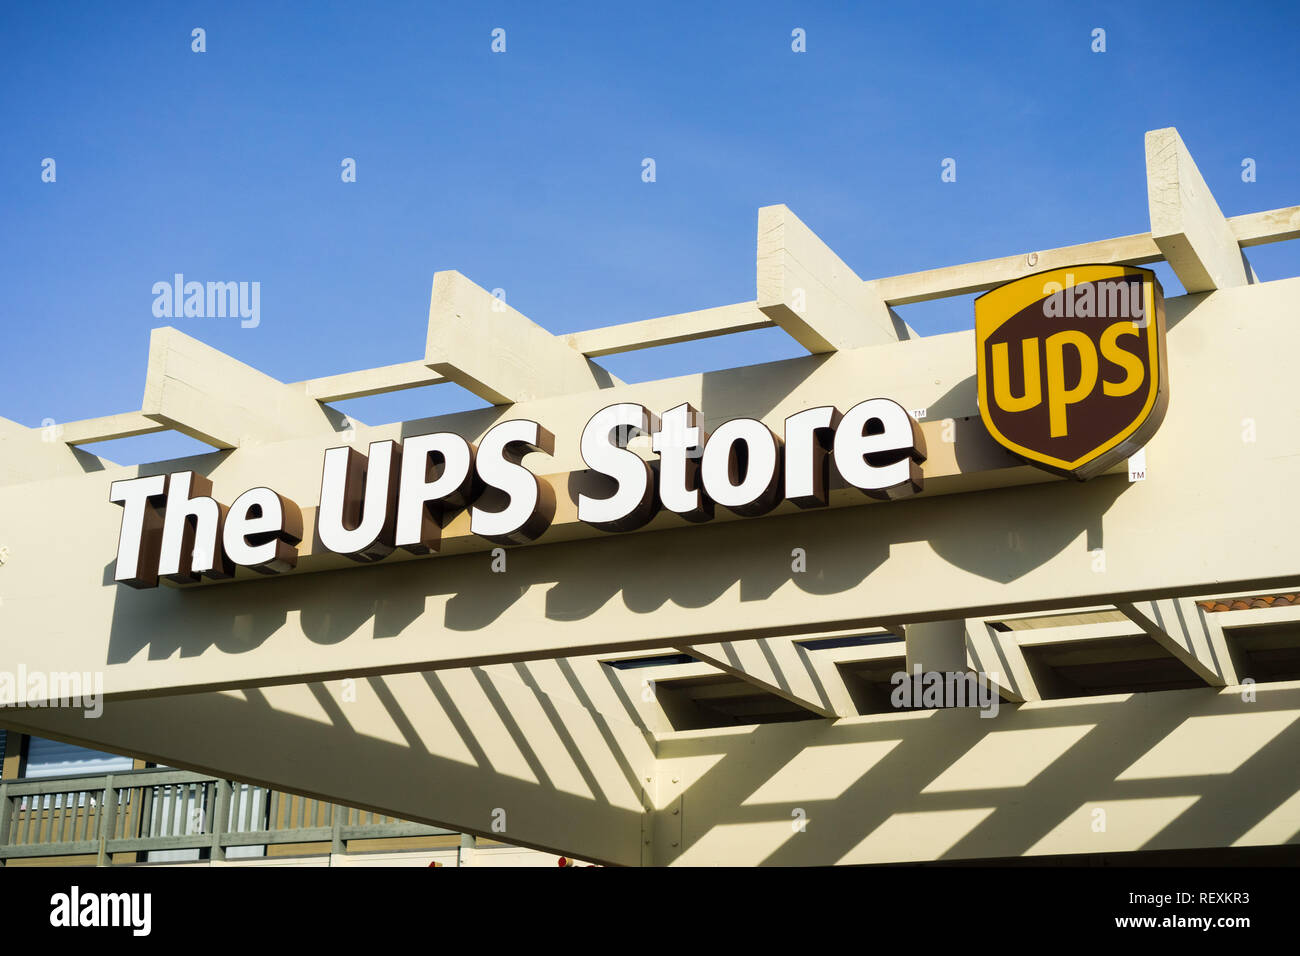 December 22, 2017 Sunnyvale / CA / USA - The UPS store logo placed above the to one of their Santa Clara county locations, San Francisco bay area Stock Photo